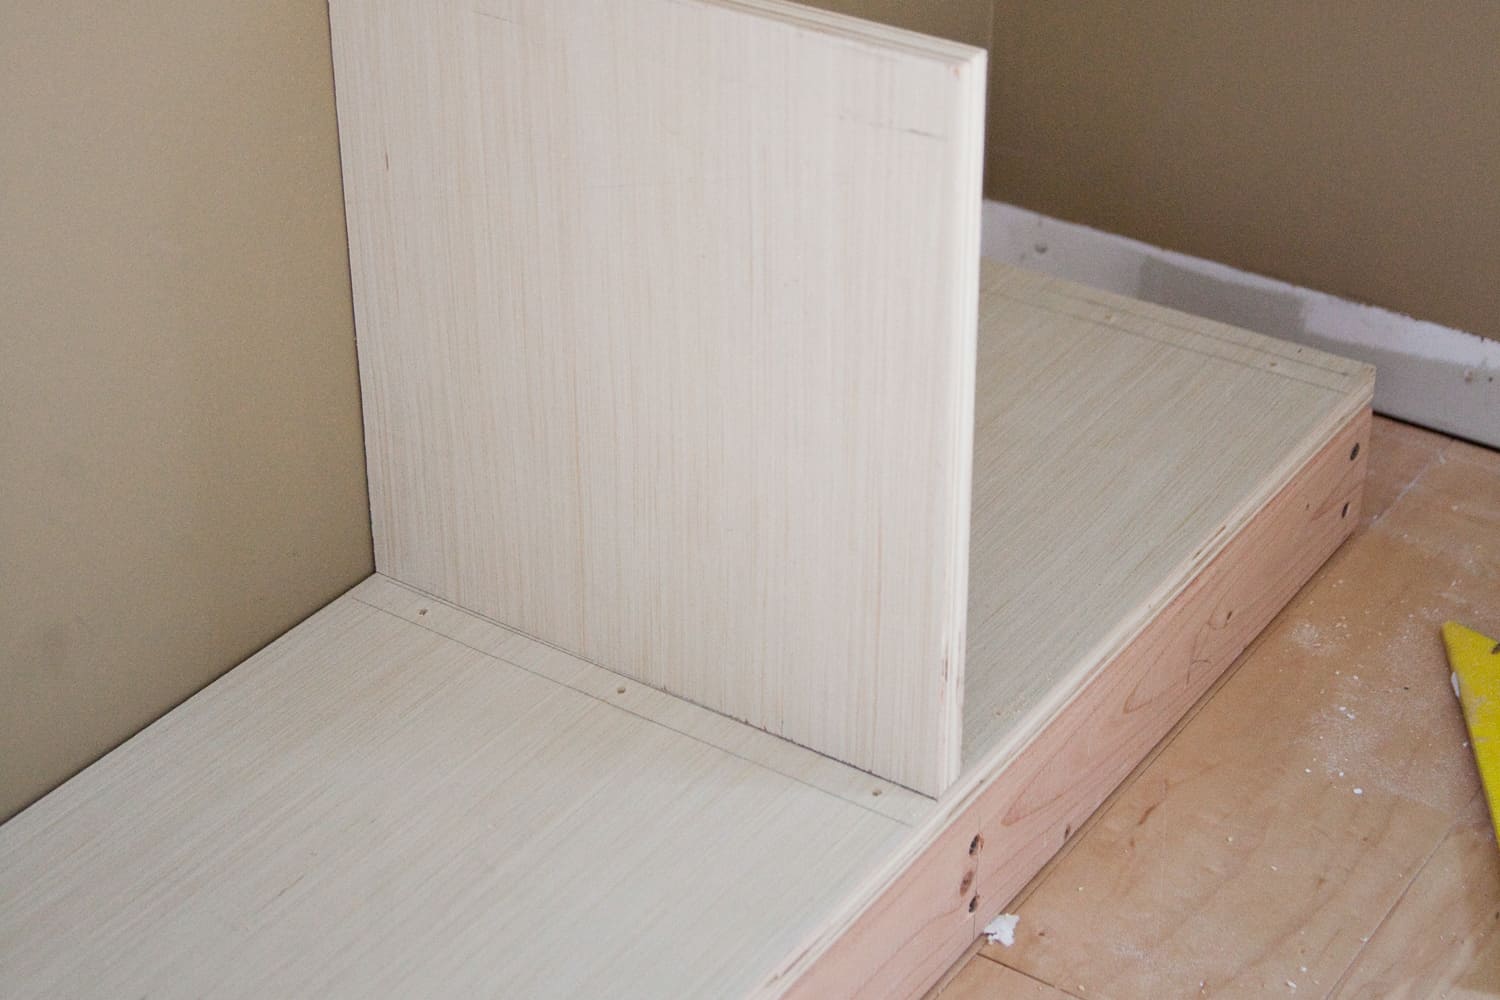 base of built-in Billy bookcase with piece of wood nailed into it on hardwood floor